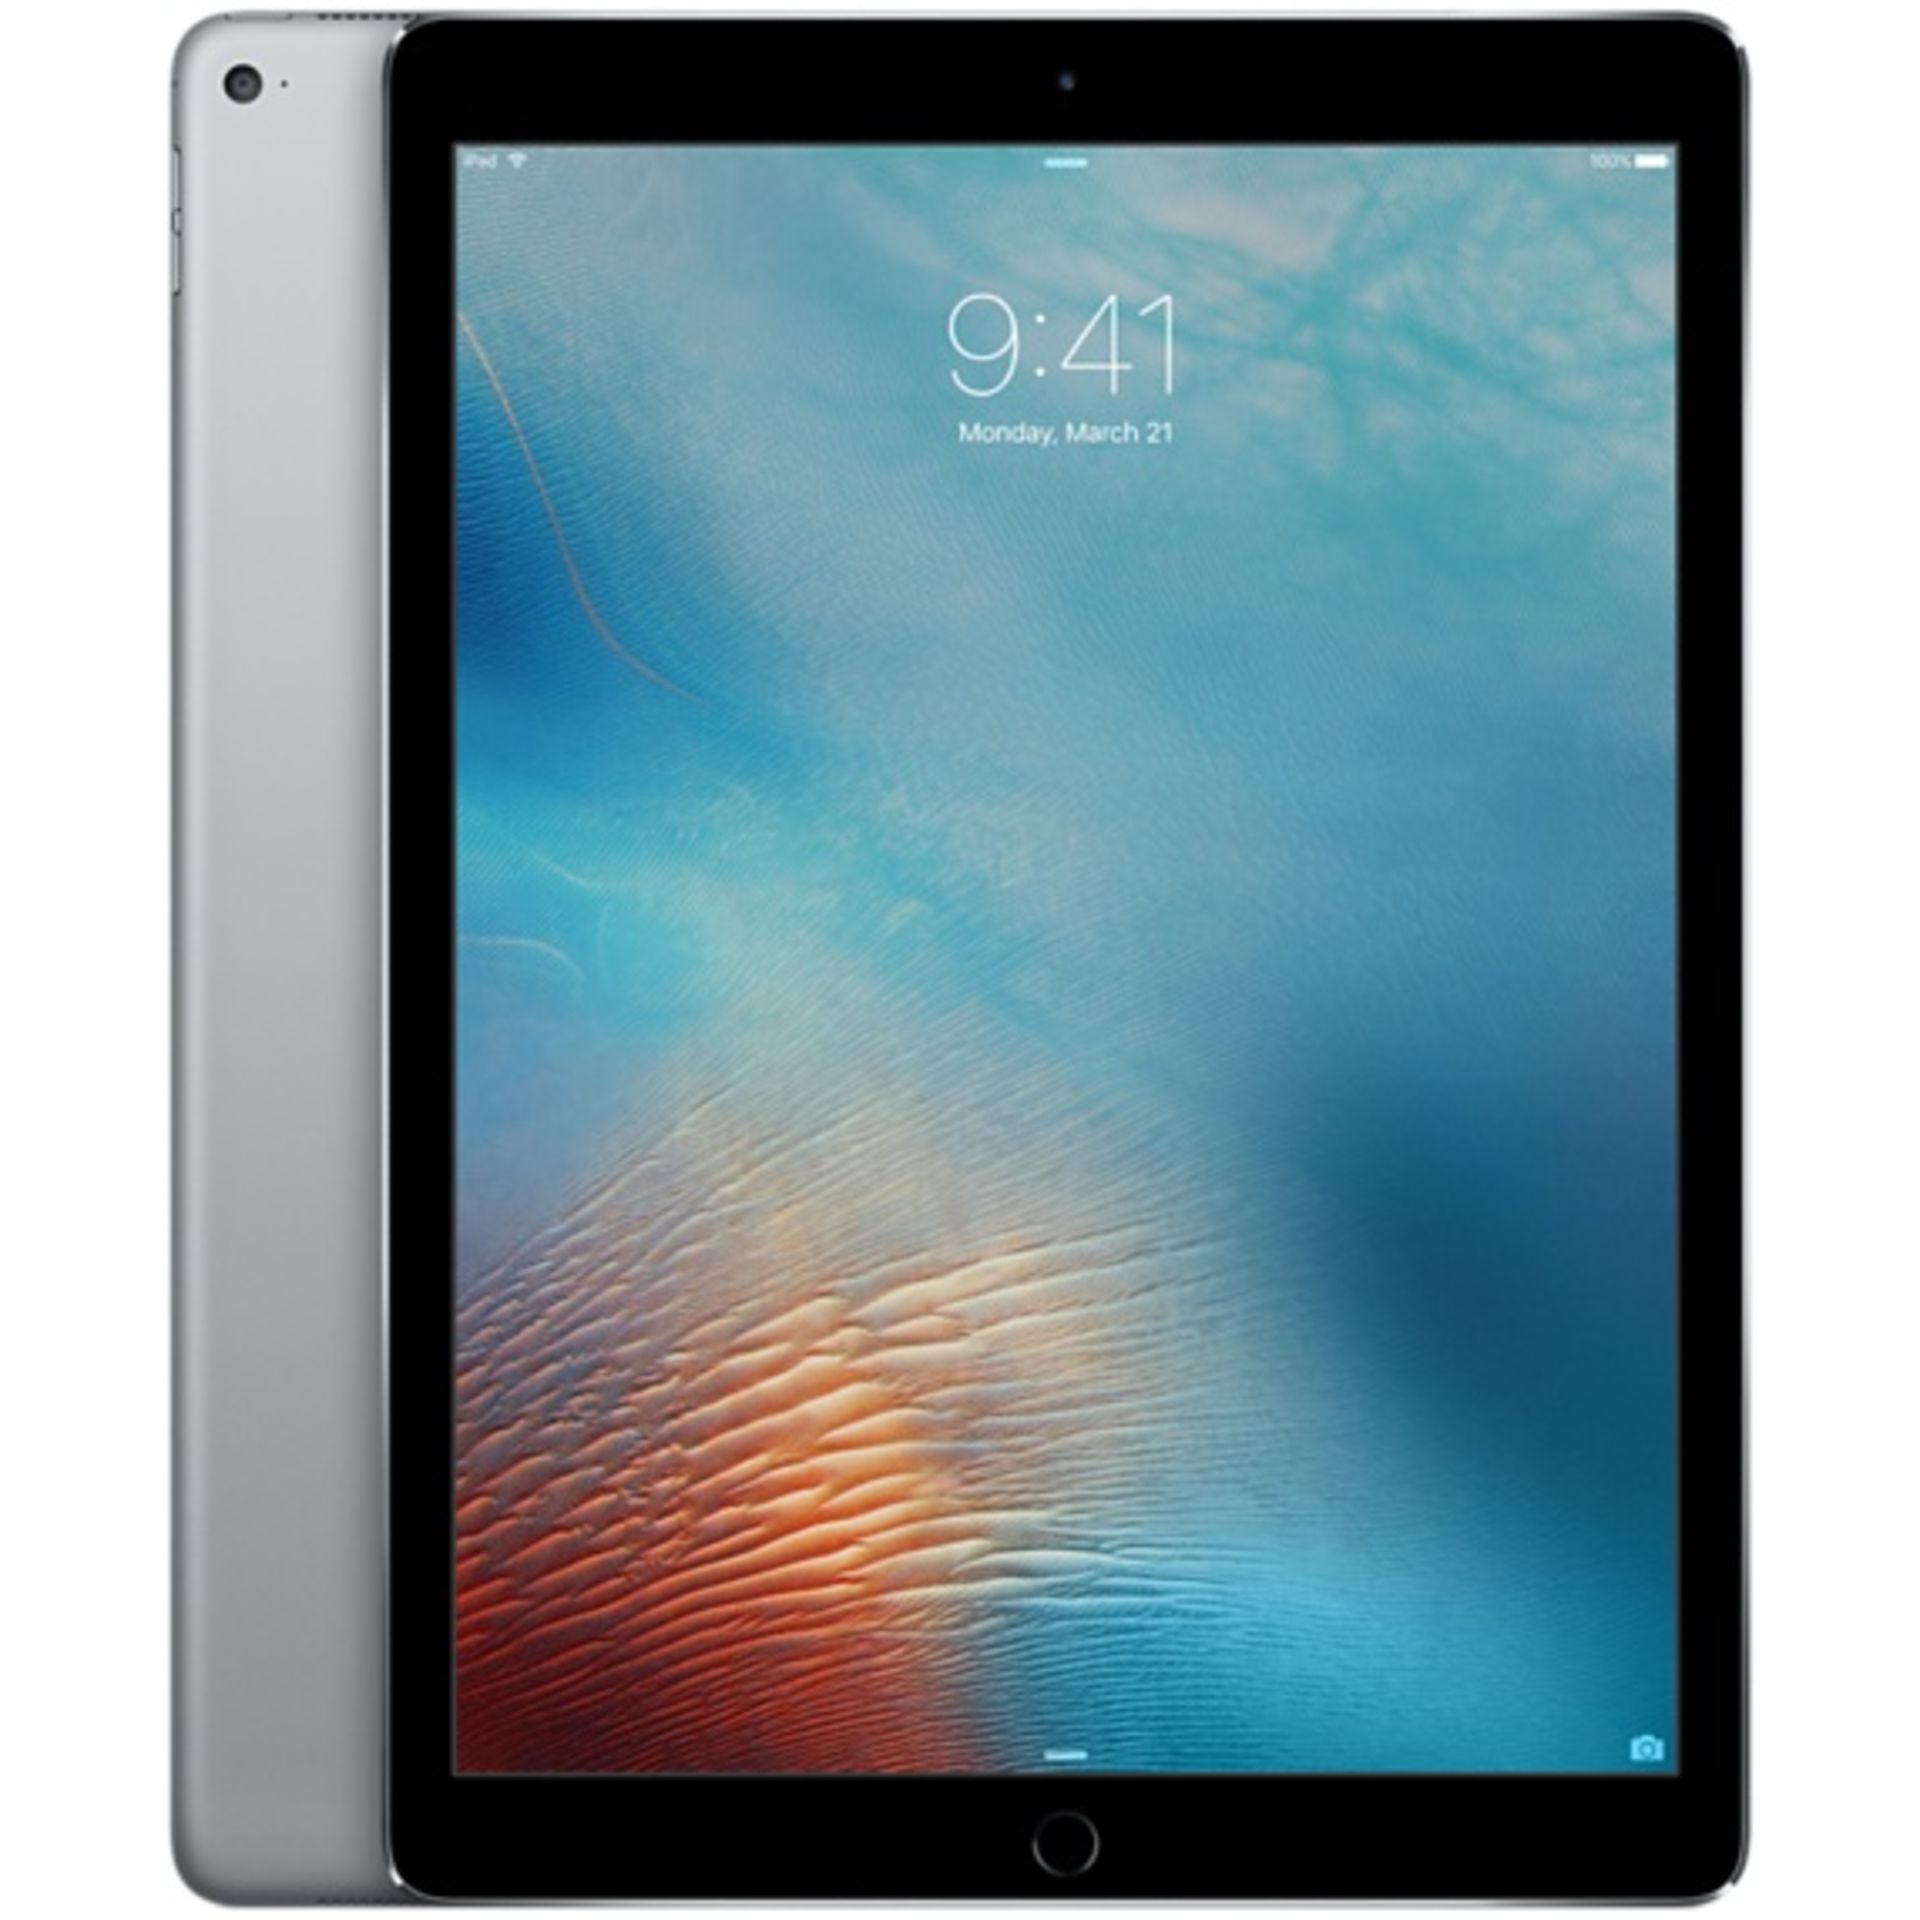 V Grade A/B Apple iPad Pro 12.9" 32GB Space Grey - In Apple Box with Apple Accessories - These are